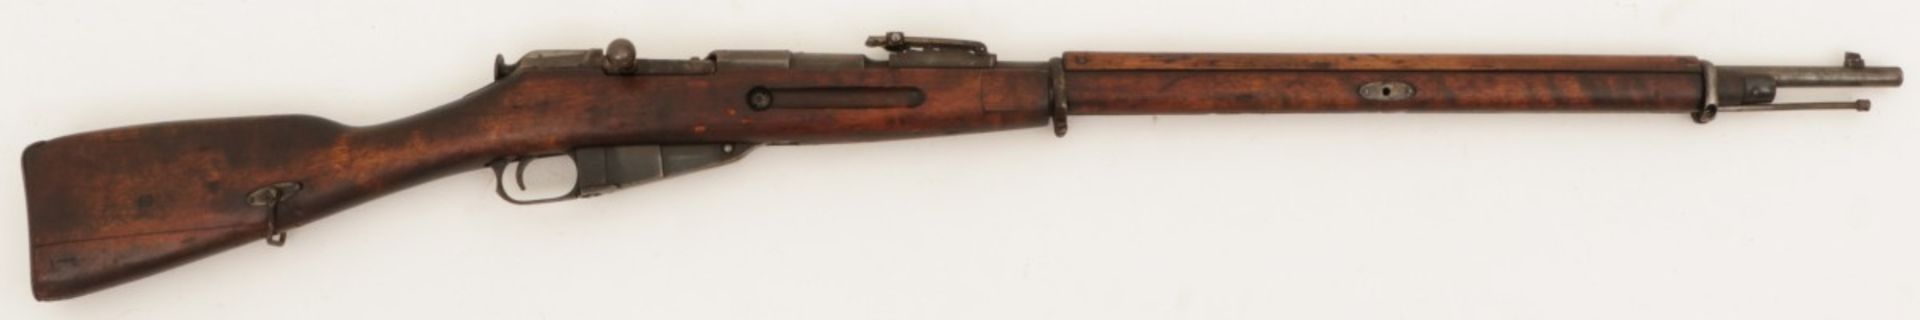 A Mosin Nagant bolt action rifle, Russia, mid. 20th century. - Image 2 of 3